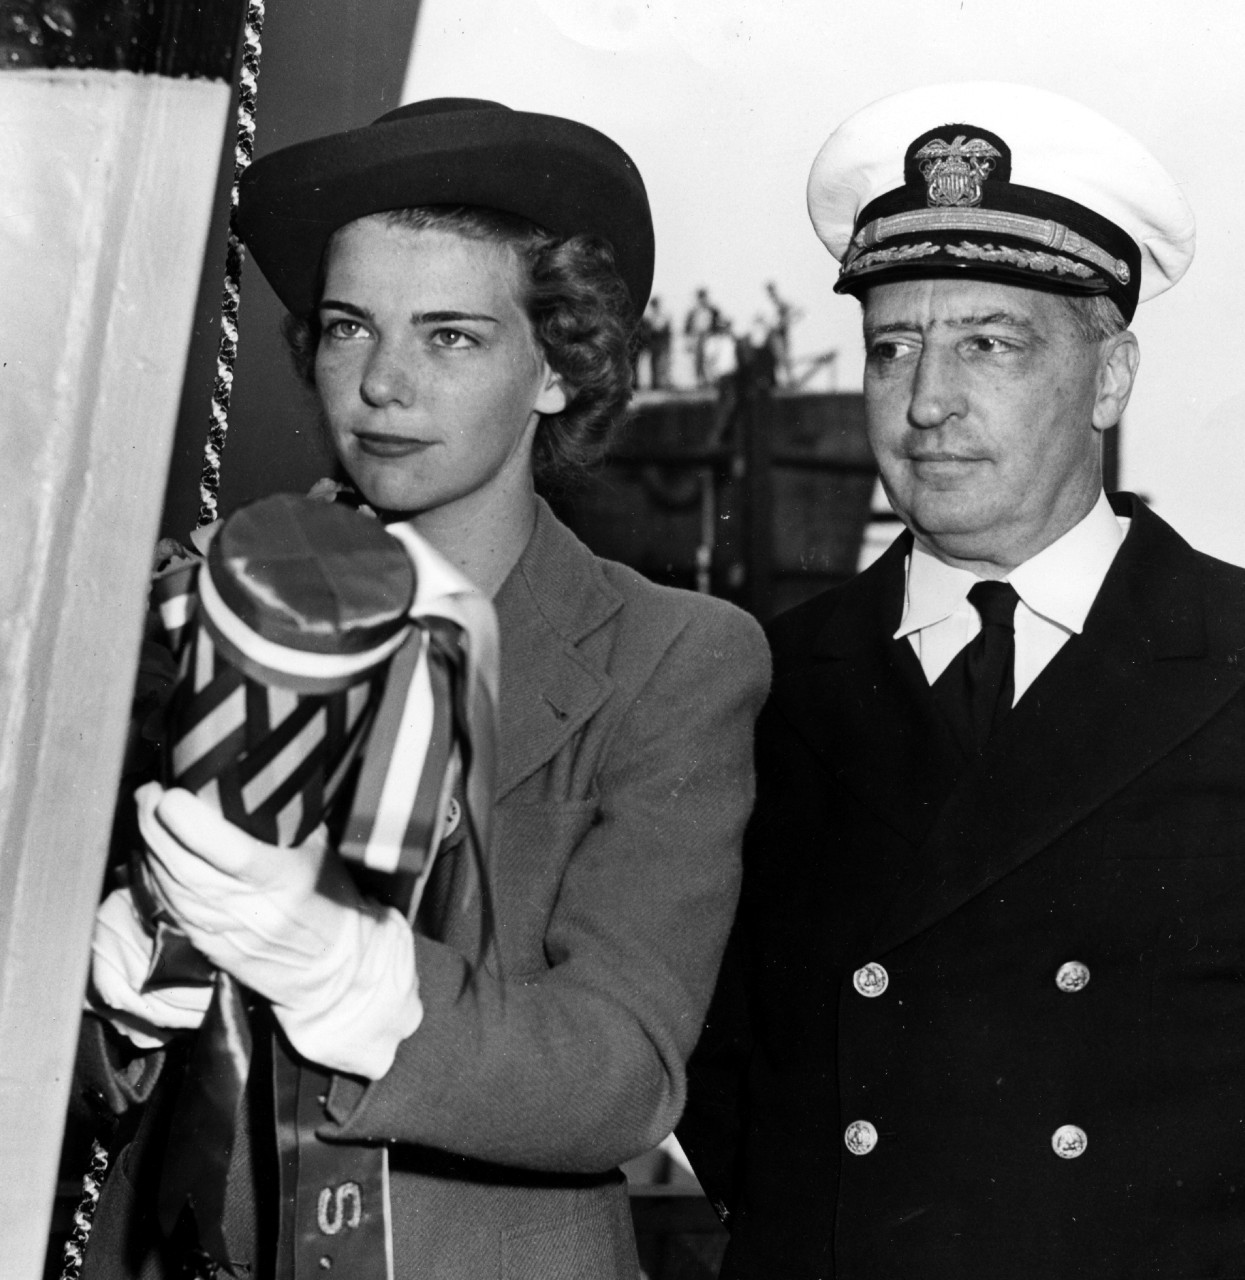 Miss Jeanne Lejeune Glennon (L), holds a bottle of Great Western Reserve Champagne, preparing to christen the ship named for her late grandfather, while Capt. James B. Glennon, her father, looks on (R), 26 August 1942. (U.S. Navy Bureau of Ships ...